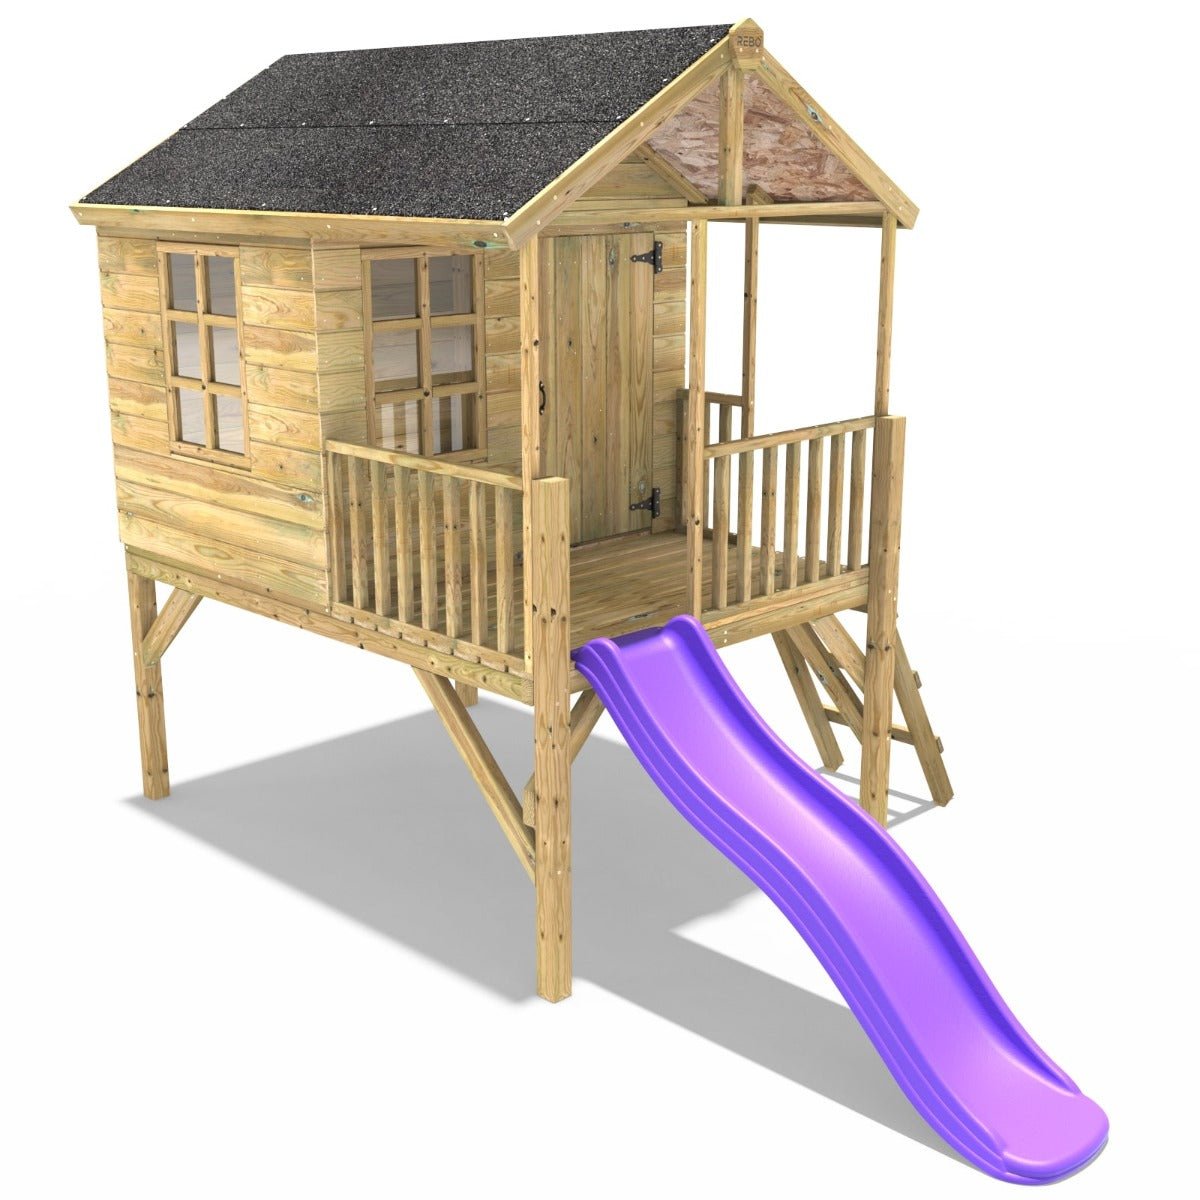 Rebo 5FT x 5FT Childrens Wooden Garden Playhouse on Deck with 6ft Slide - Partridge Purple